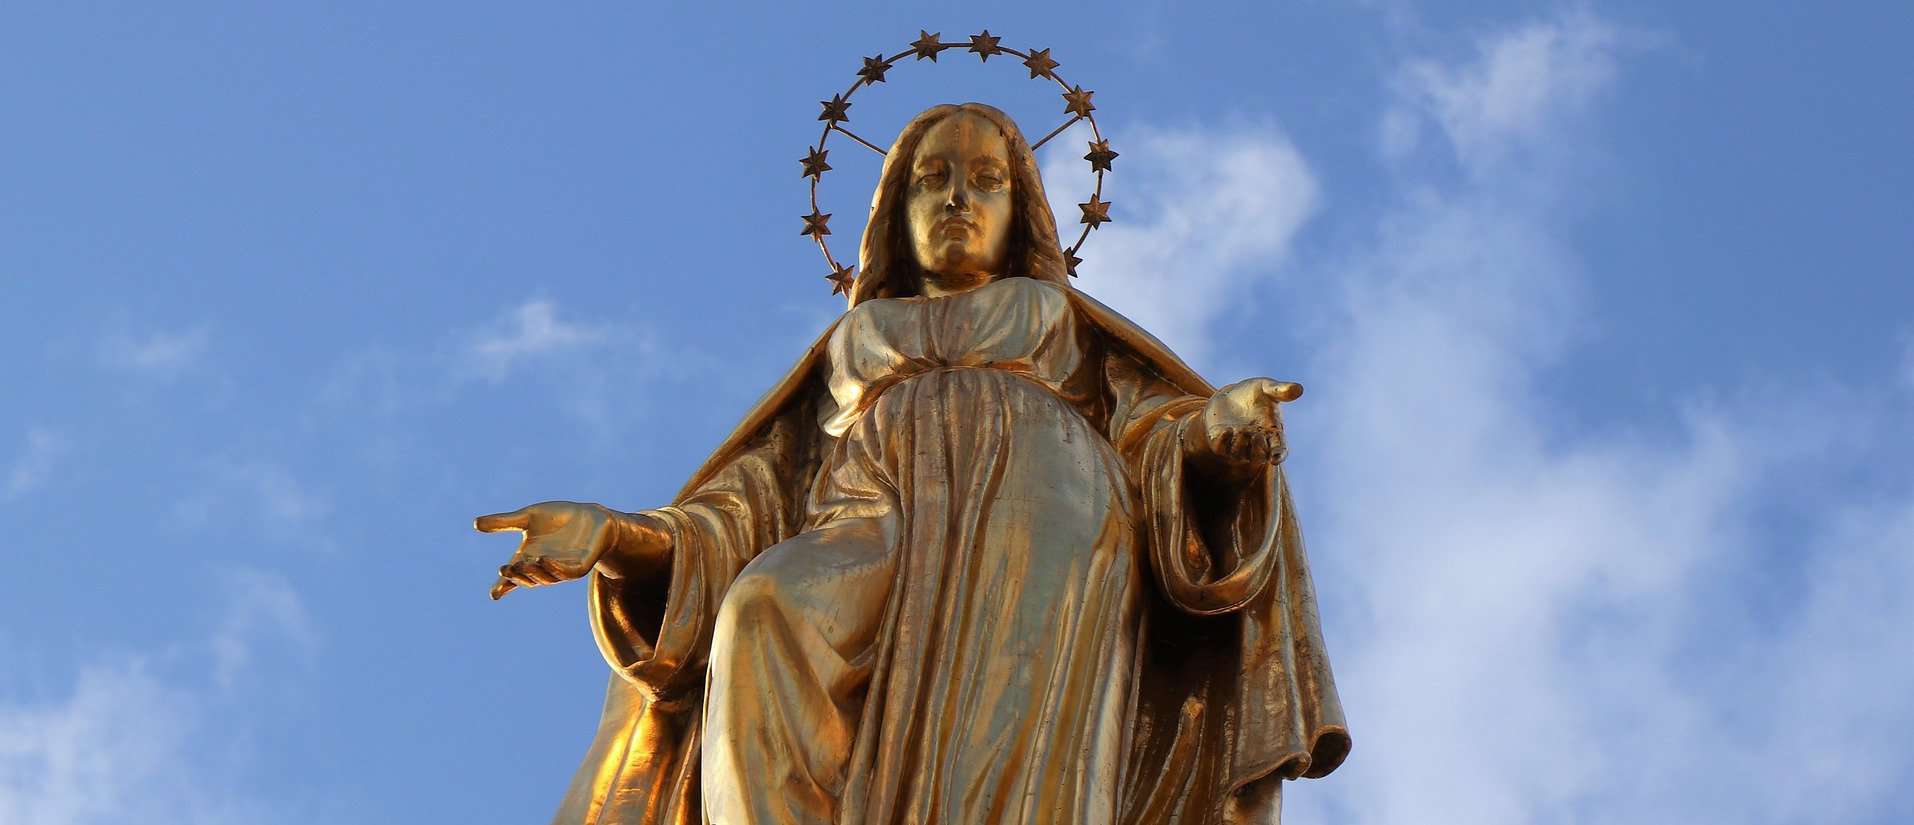 A golden statue of a saint is shown from below.